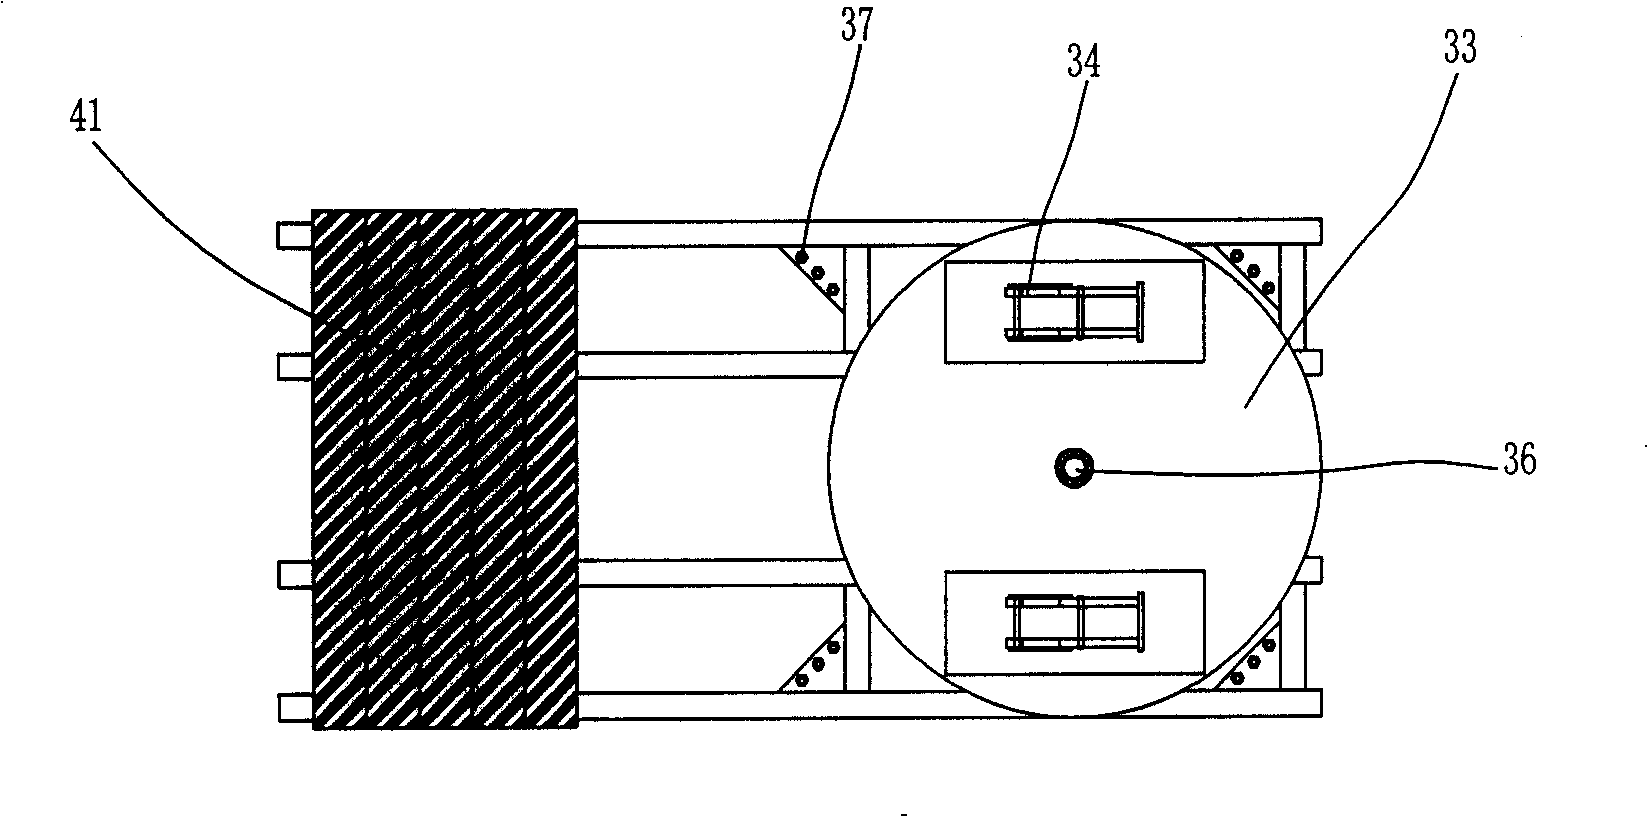 Lifting and hoisting method of vertical equipment